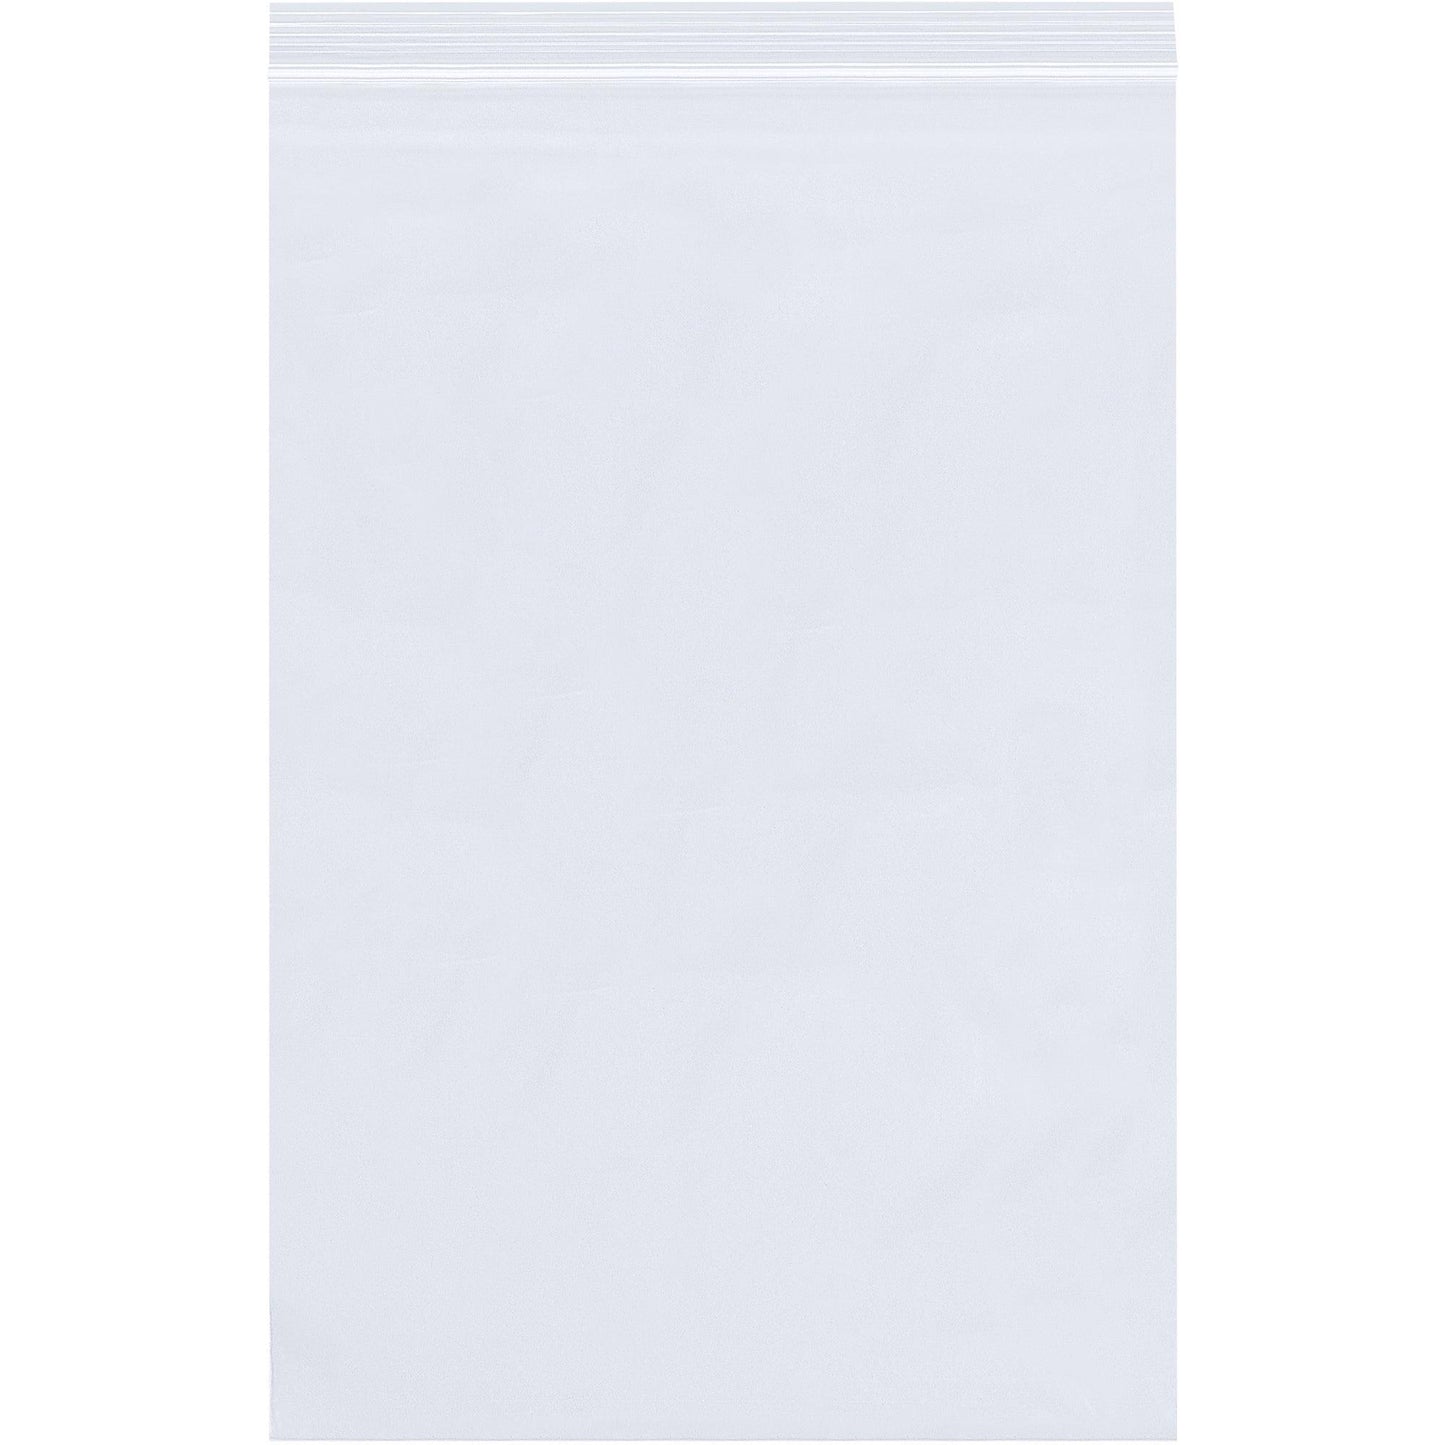 6 x 20" - 2 Mil Reclosable Poly Bags - PB3626